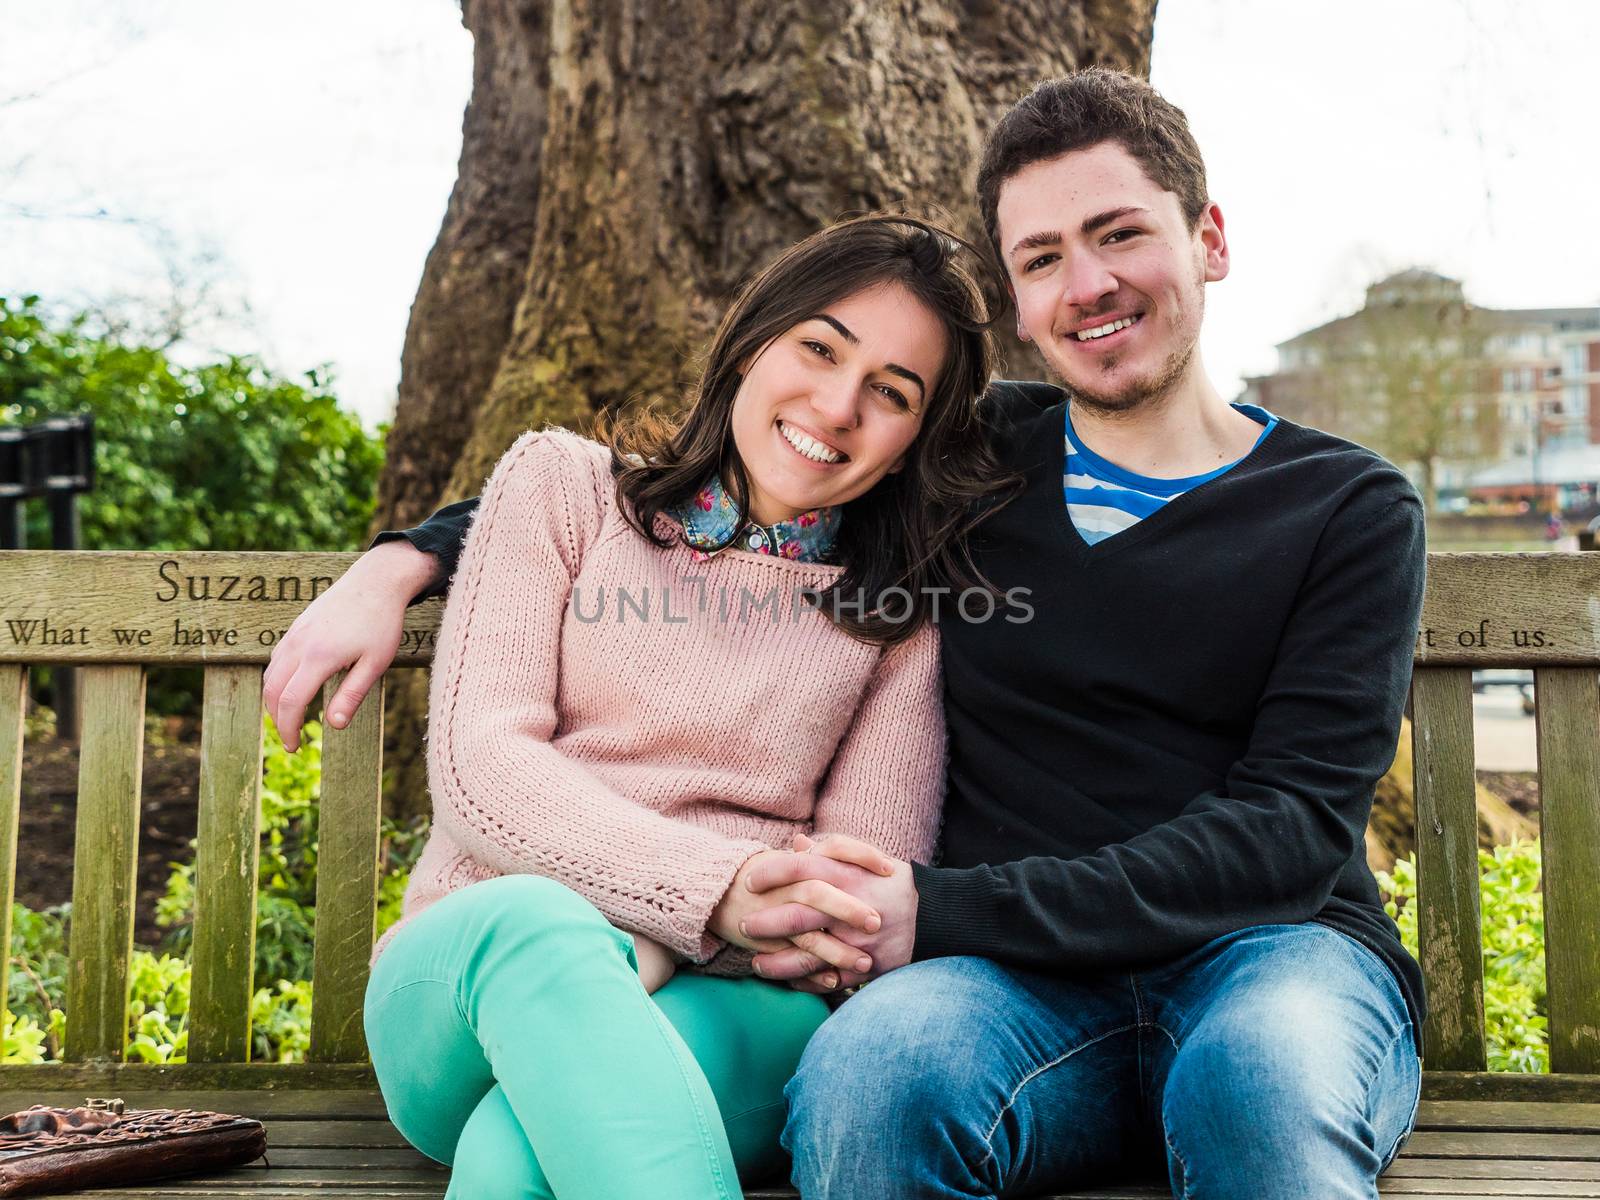 Young Heterosexual Couple Sitting on a Park Bench Enjoying a Beautiful Sunny Day and Smiling Looking at the Camera